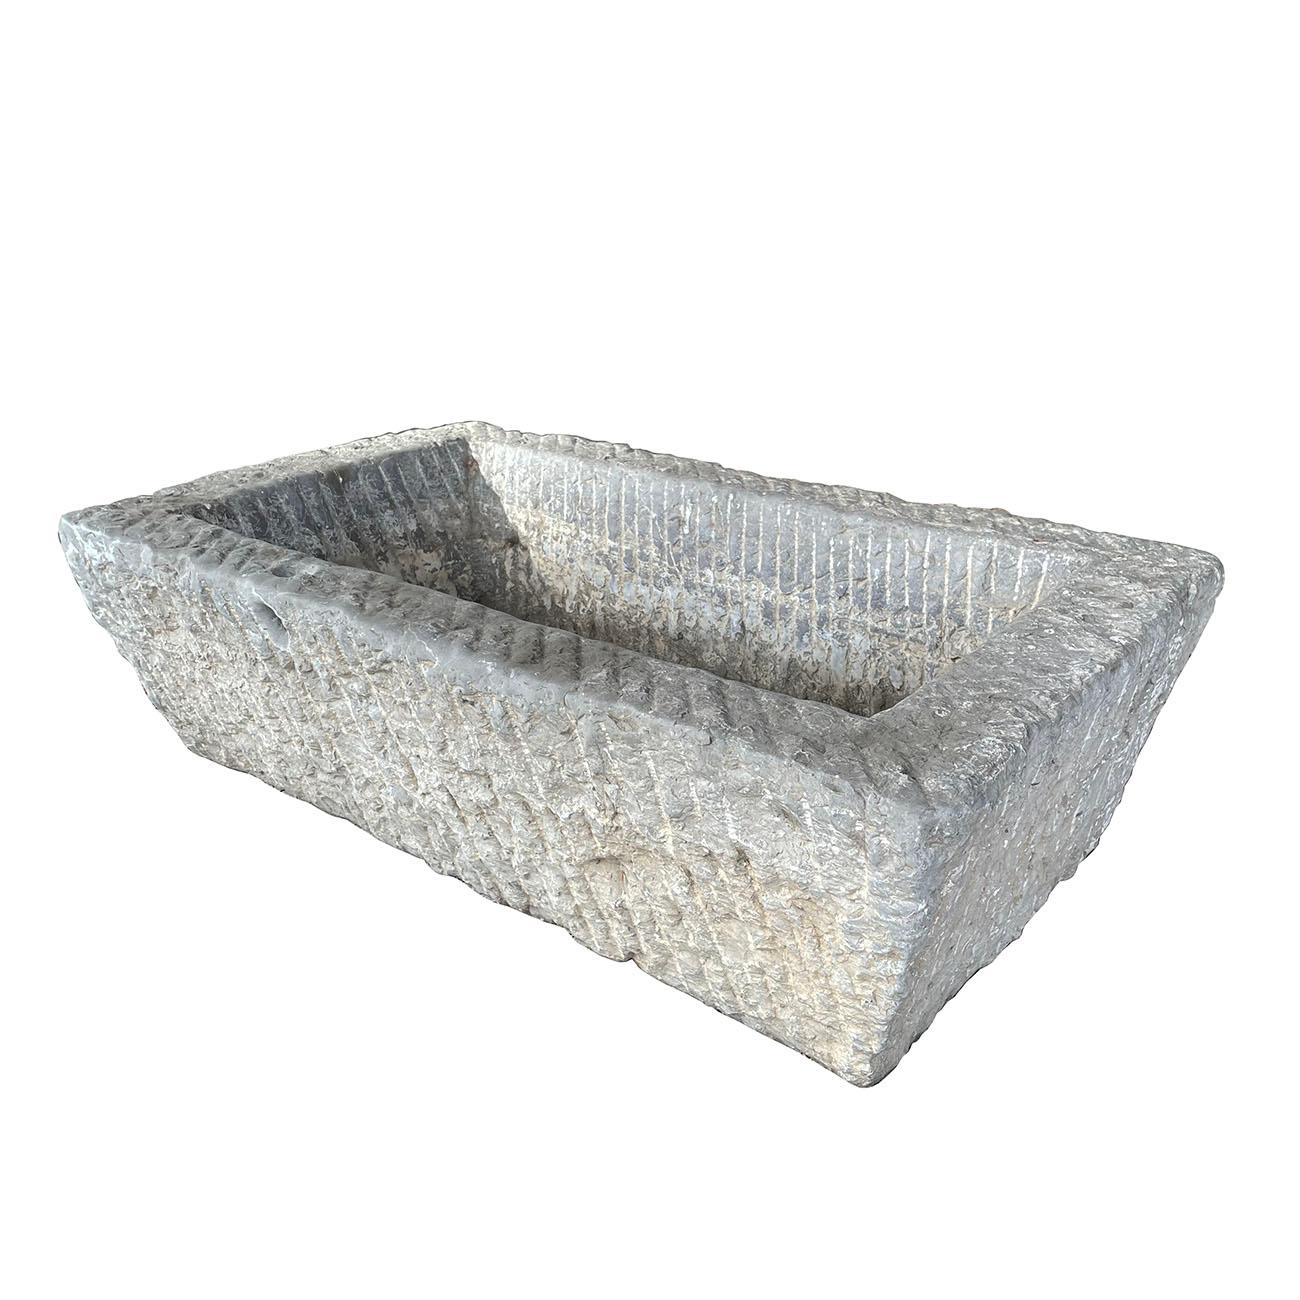 This stone trough is retrieved from the village in northern China. It is hand carved out one piece of stone and hand chiseled by the local stone master. It's originally for feeding household animals, etc. Now It can be an unique garden elements,